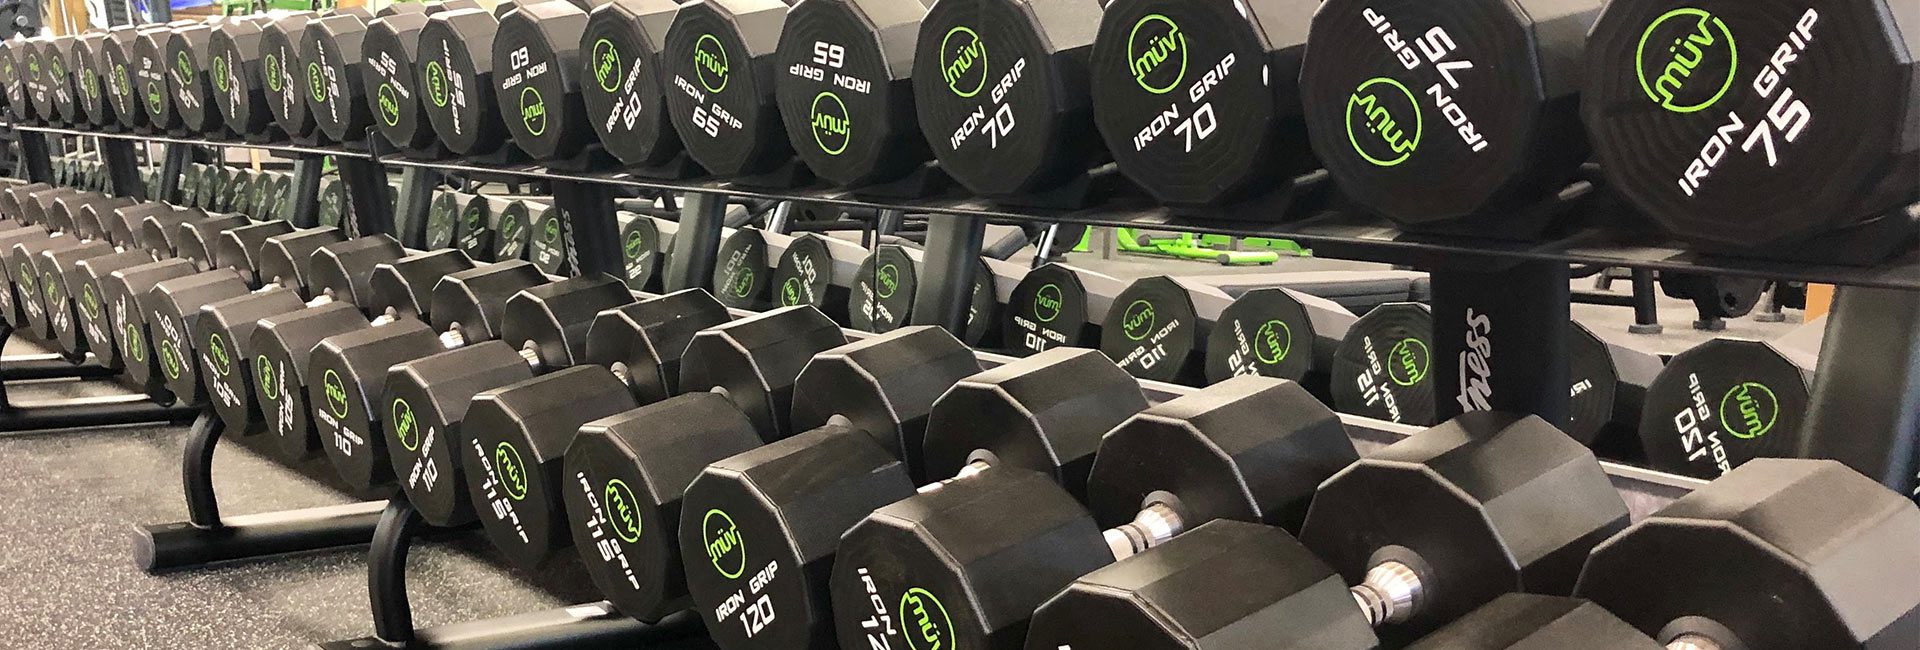 modern gym with tons of weights neatly organized